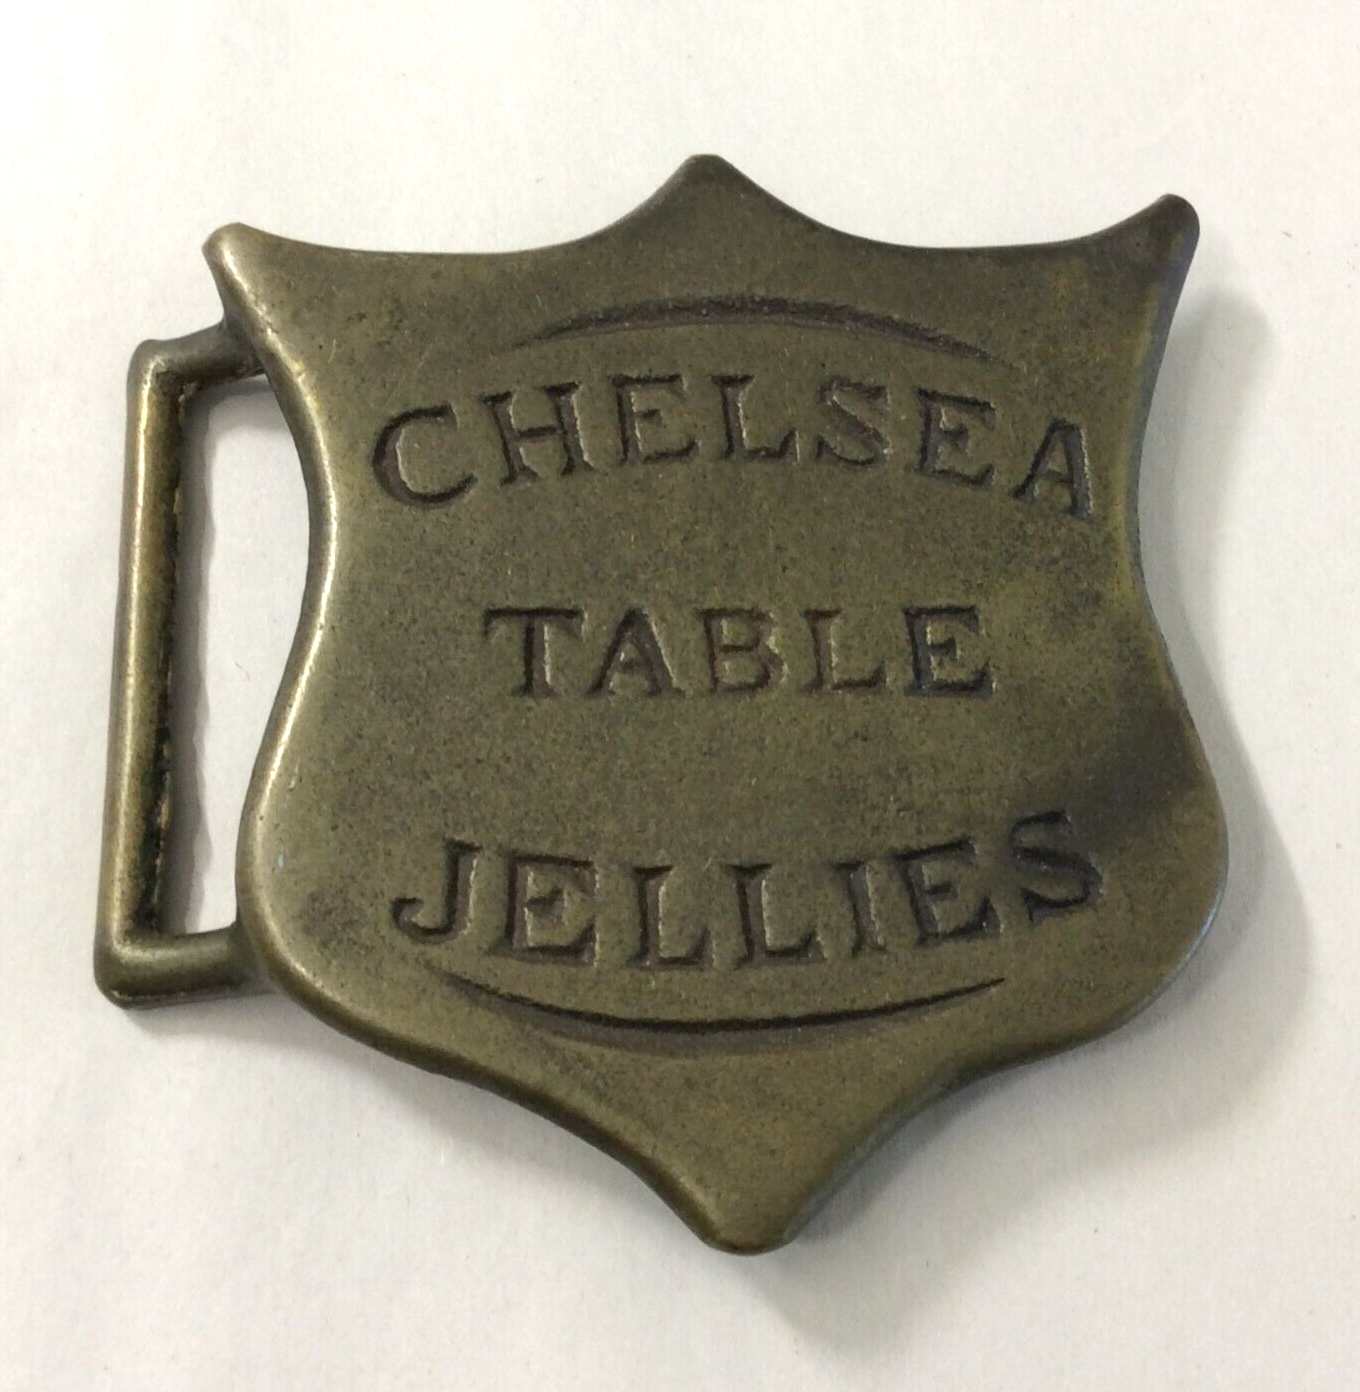 Primary image for Vintage Chelsea Table Jellies Belt Buckle UK Brass Badge Style Buckle